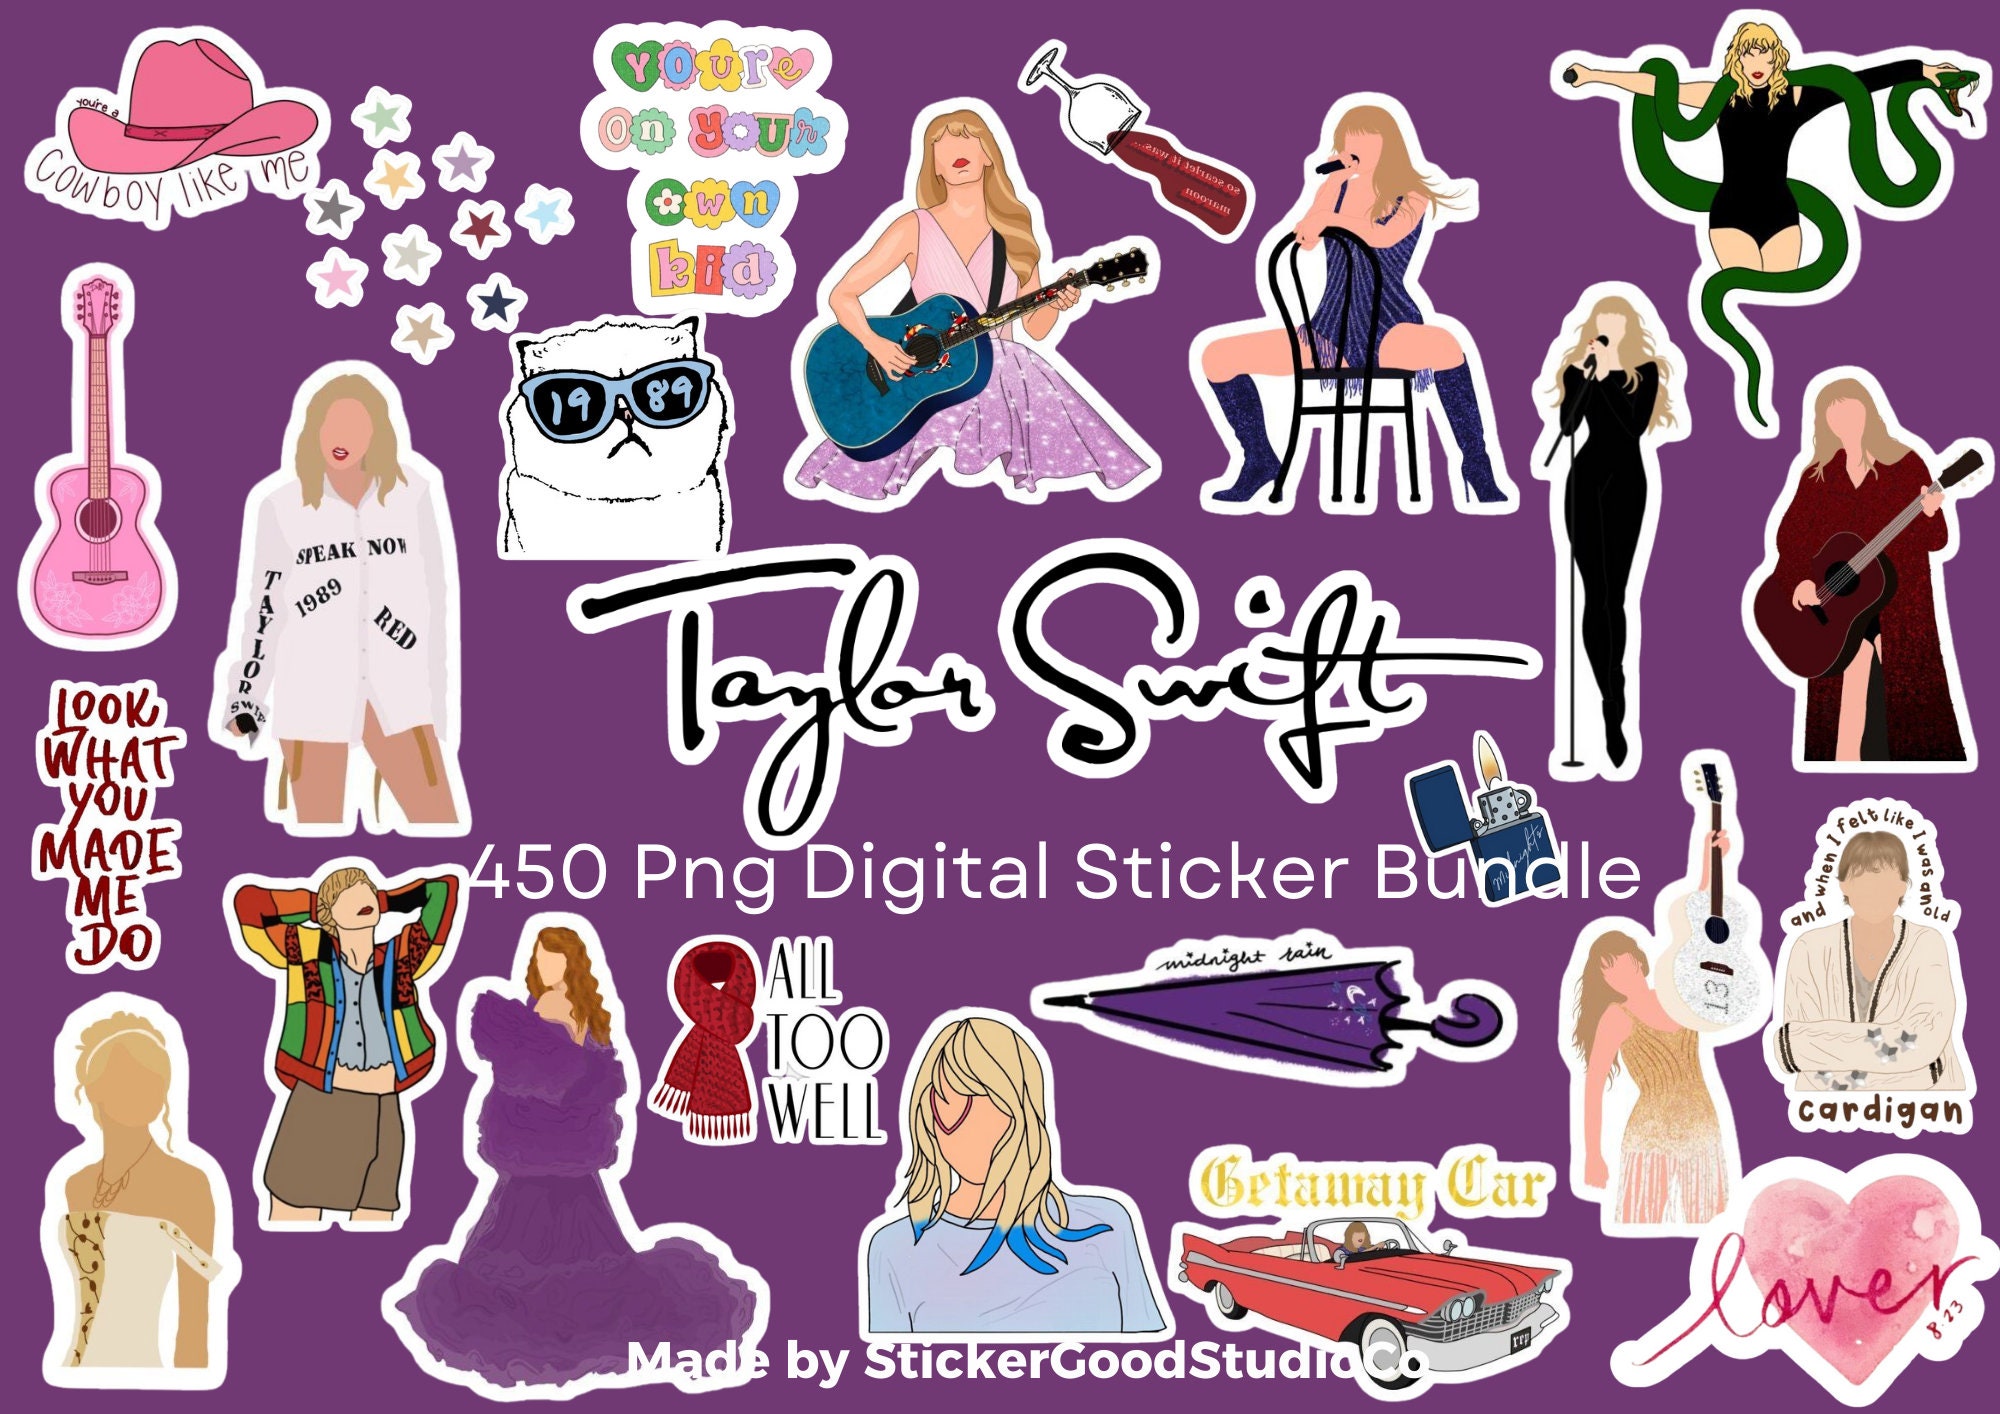 Taylor Swift Sticker, Albums as Books, Black and White Book Spines, Die-cut  Aesthetic Minimalist Sticker, Swiftie Gift, Bookish Sticker 